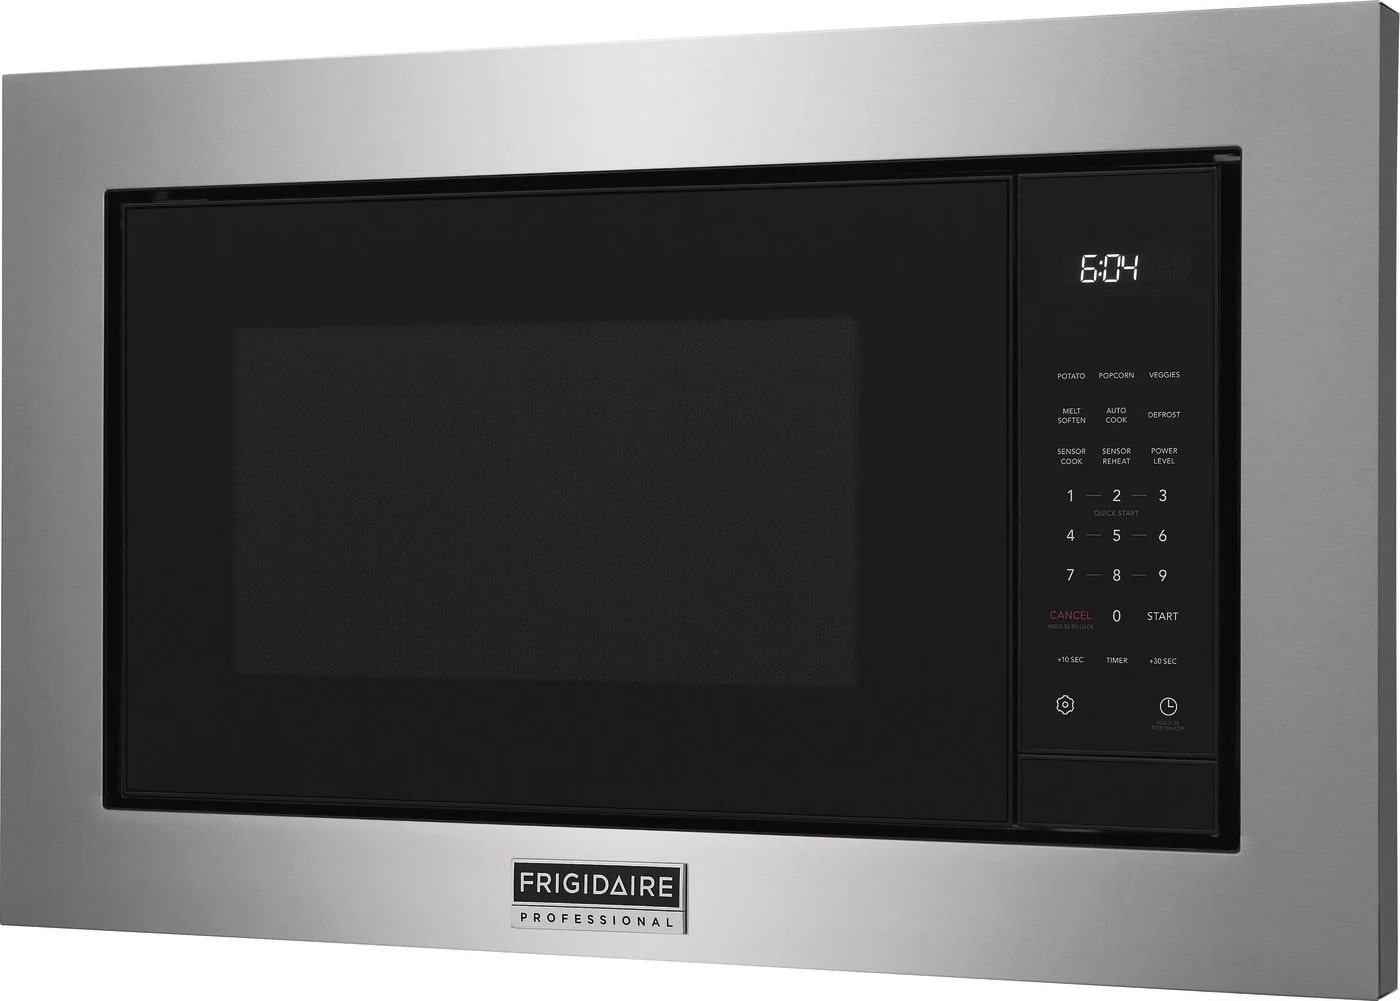 Frigidaire Professional - 2.2 cu. Ft  Built In Microwave in Stainless - PMBS3080AF